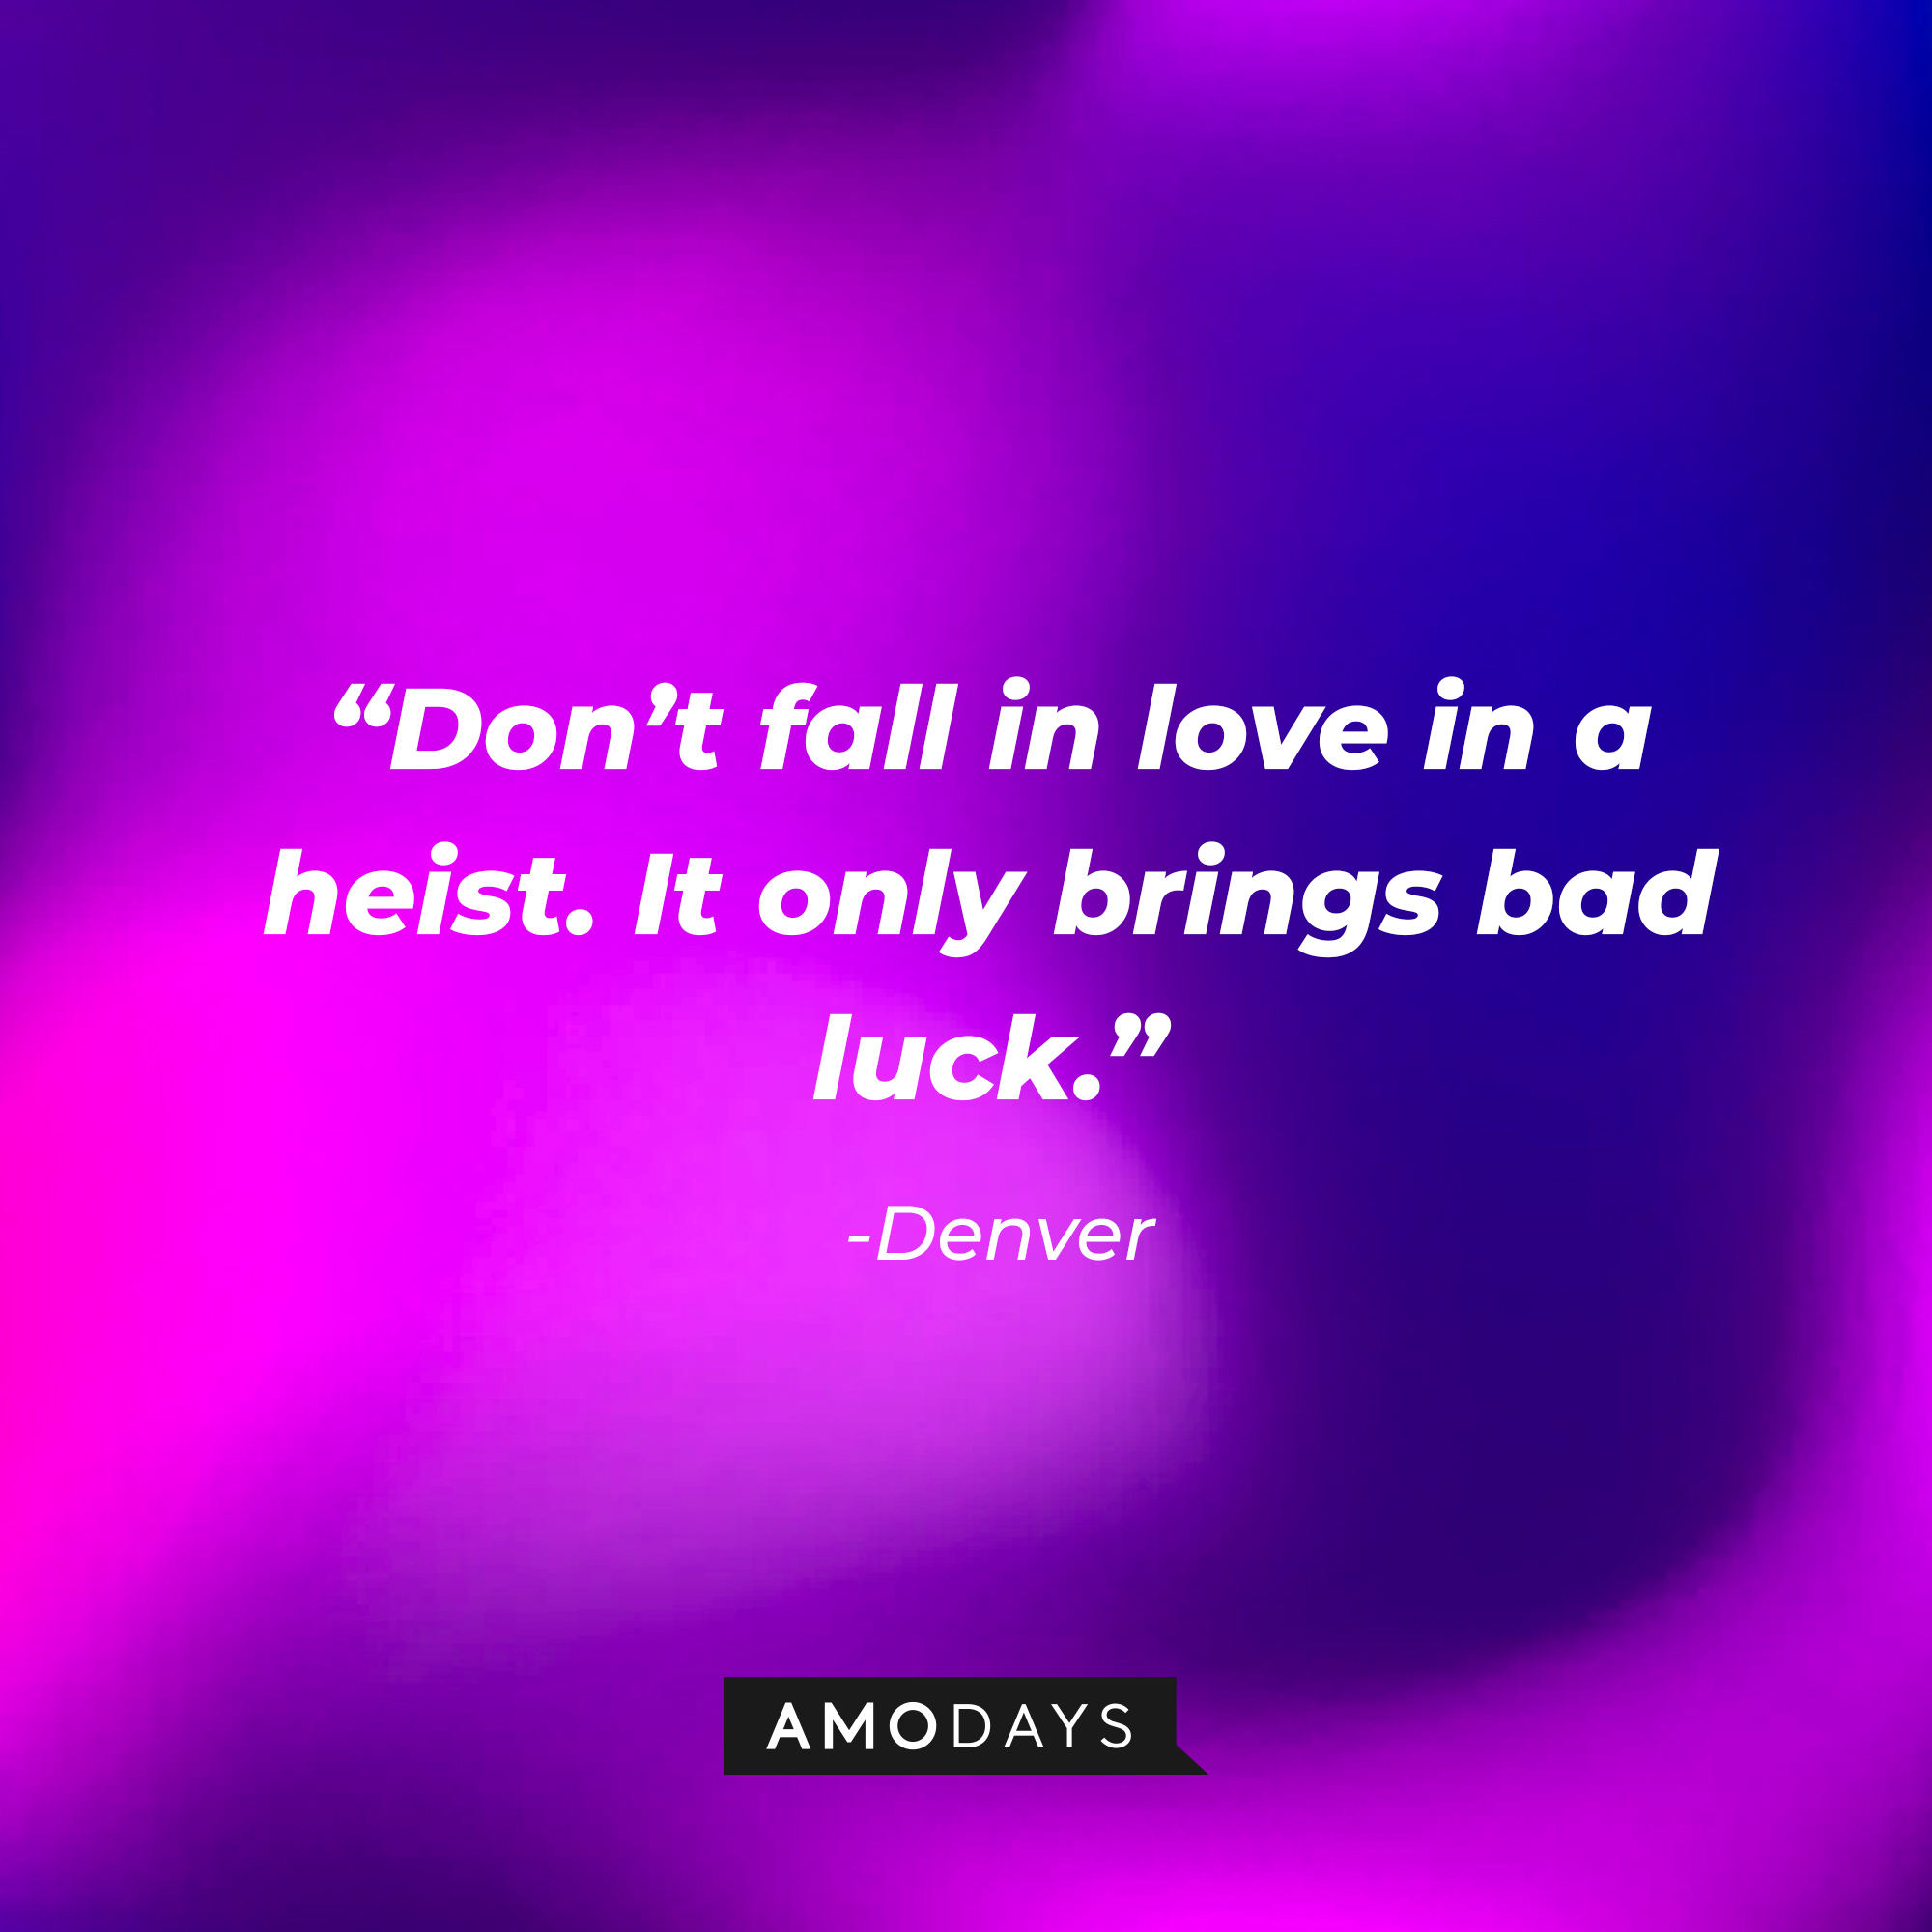 Denver’s  quote: “Don’t fall in love in a heist. It only brings bad luck.” | Source: AmoDays